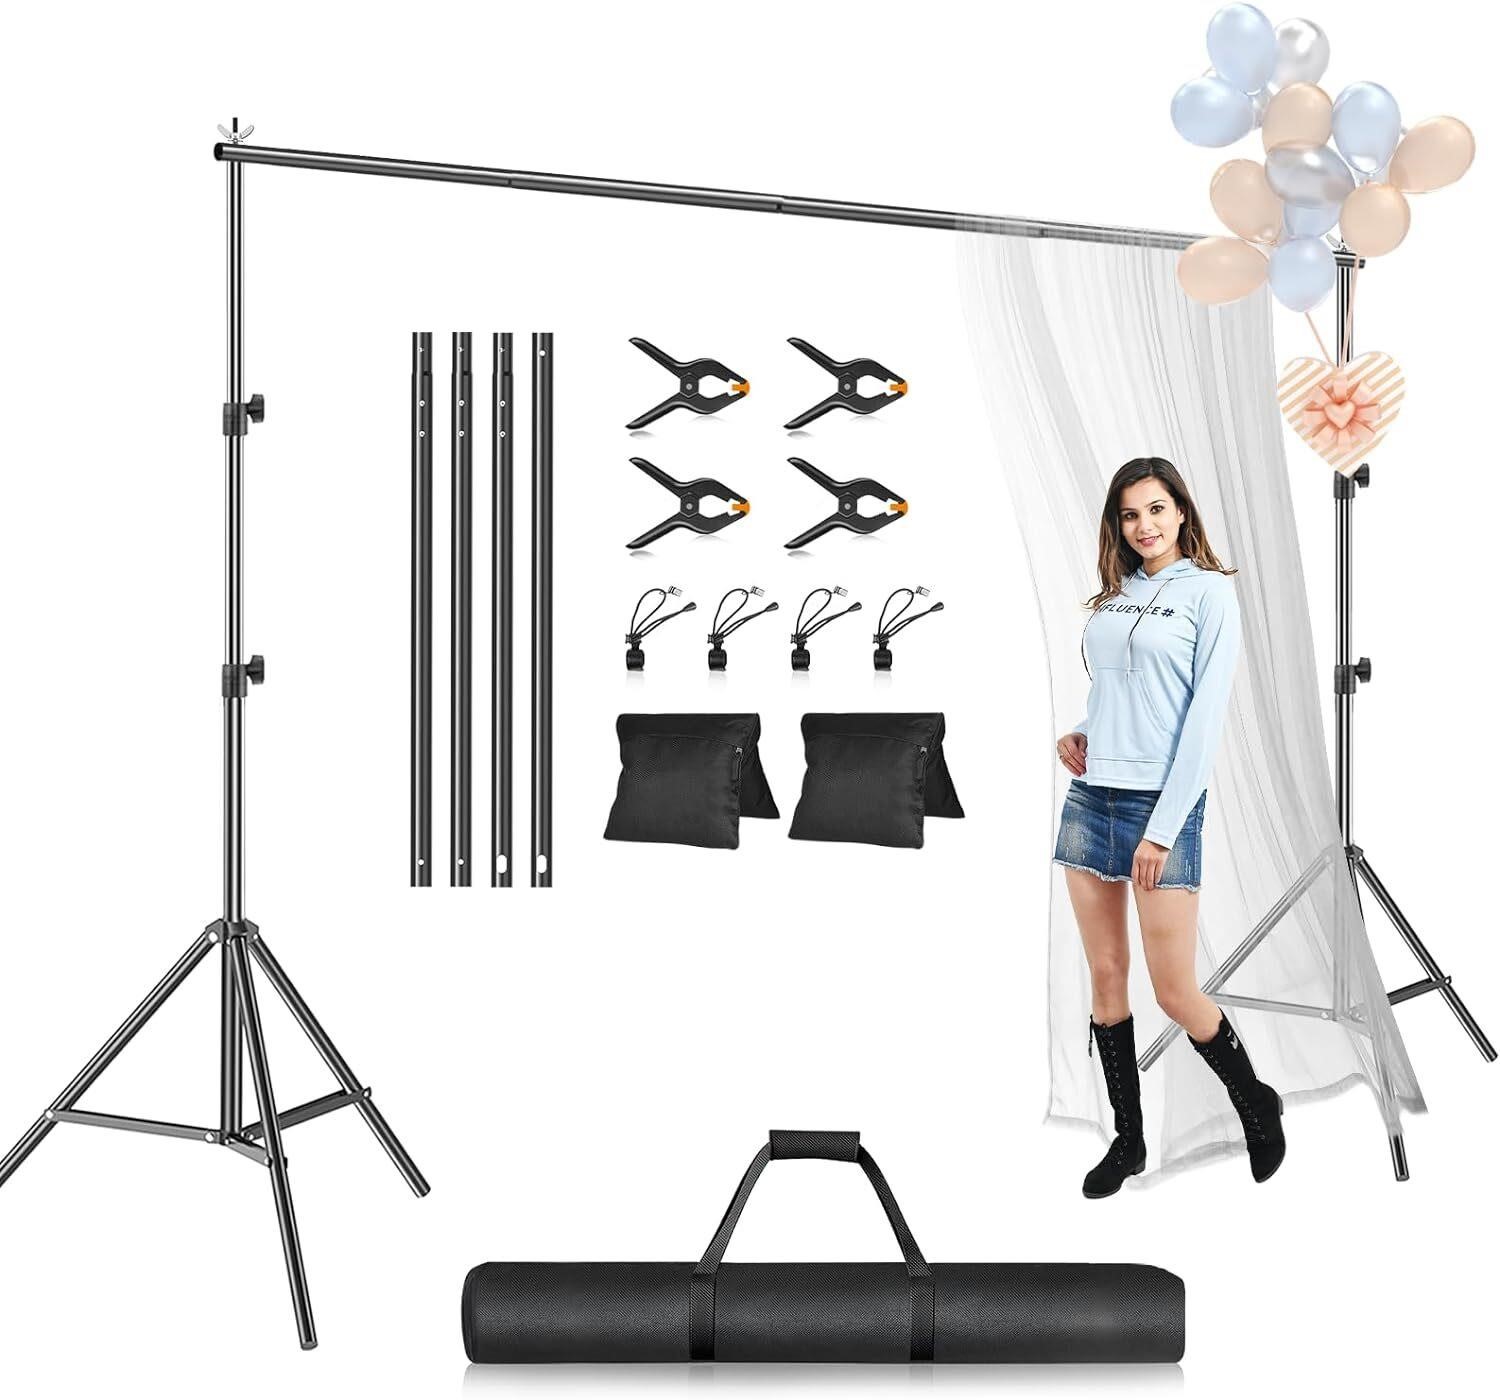 EMART Photo Backdrop Stand Kit  7.8 x 10 ft H X W